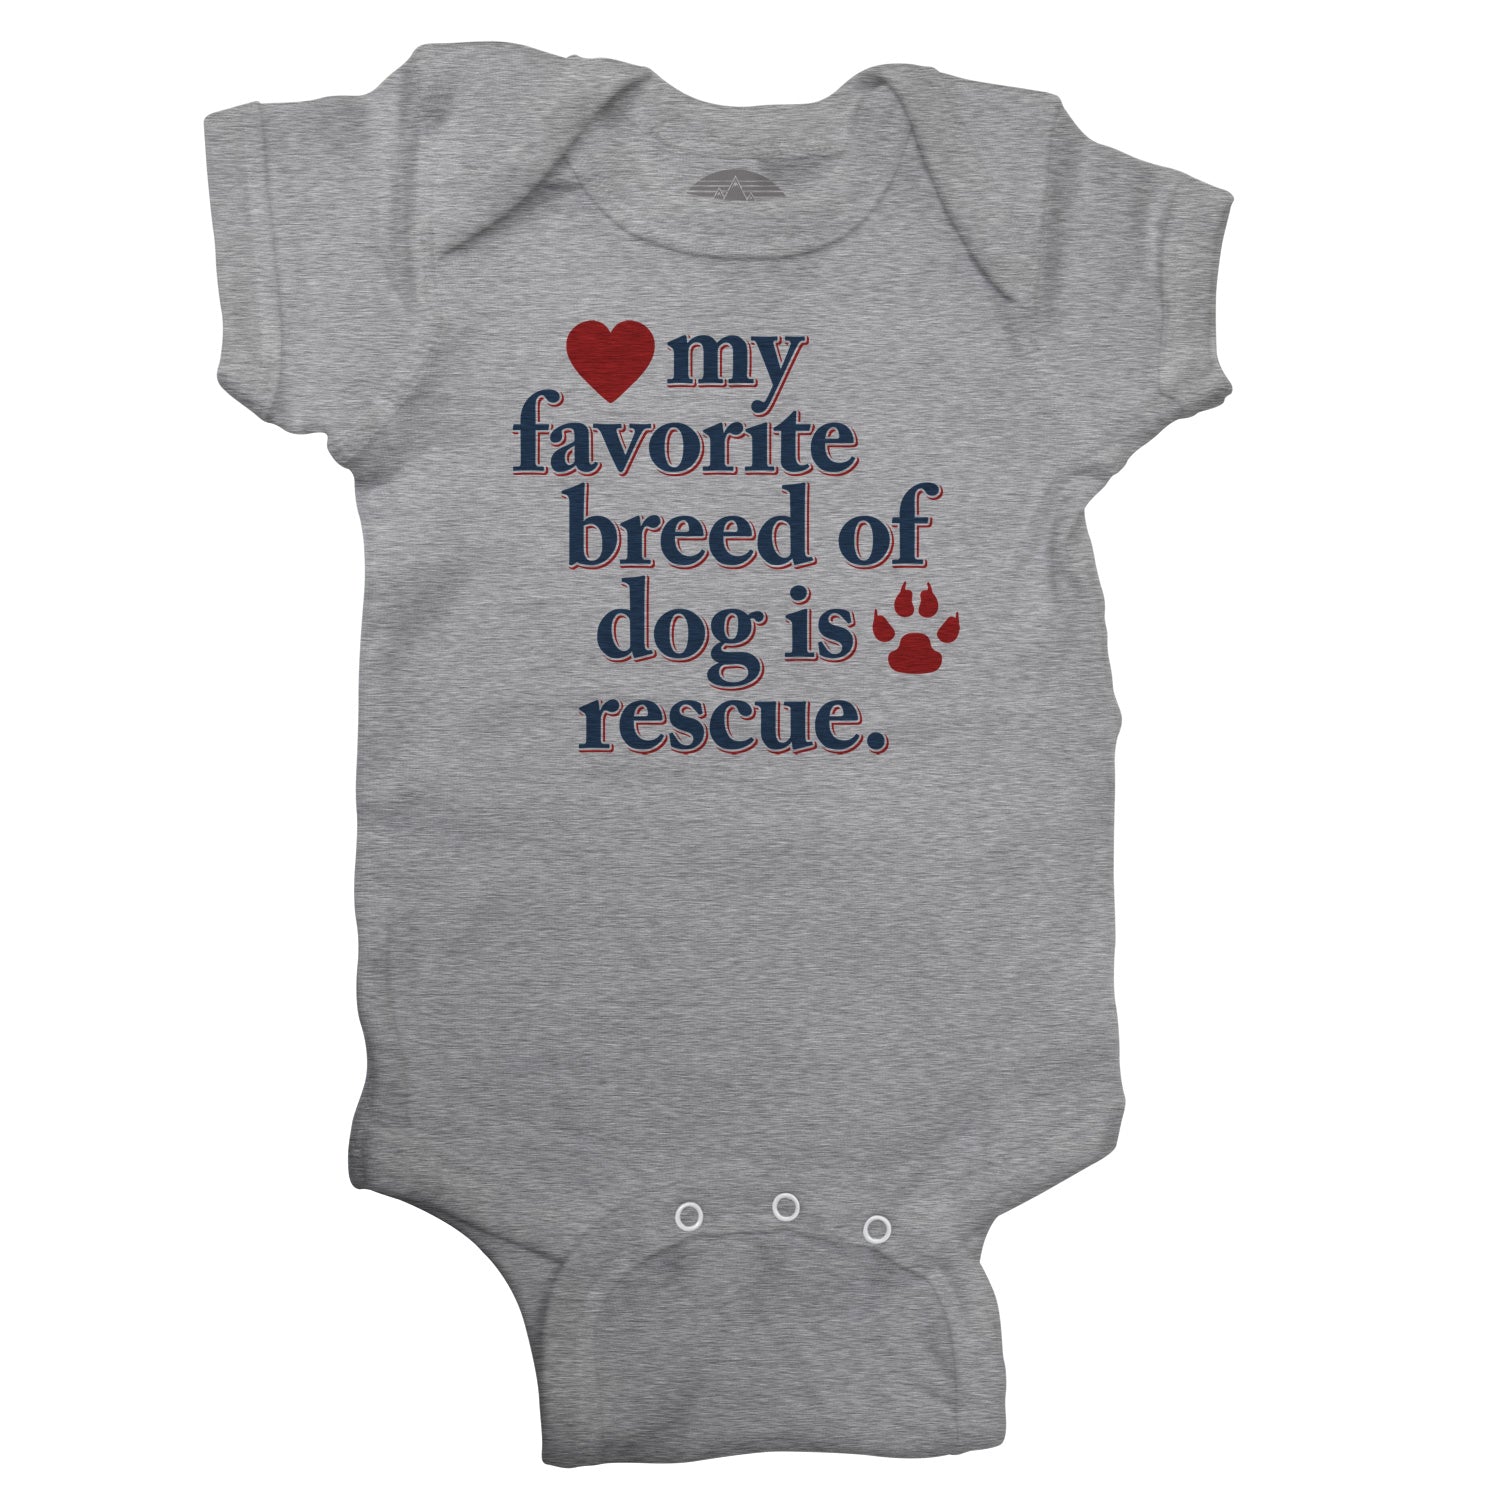 My Favorite Breed Of Dog Is Rescue Infant Bodysuit - Unisex Fit